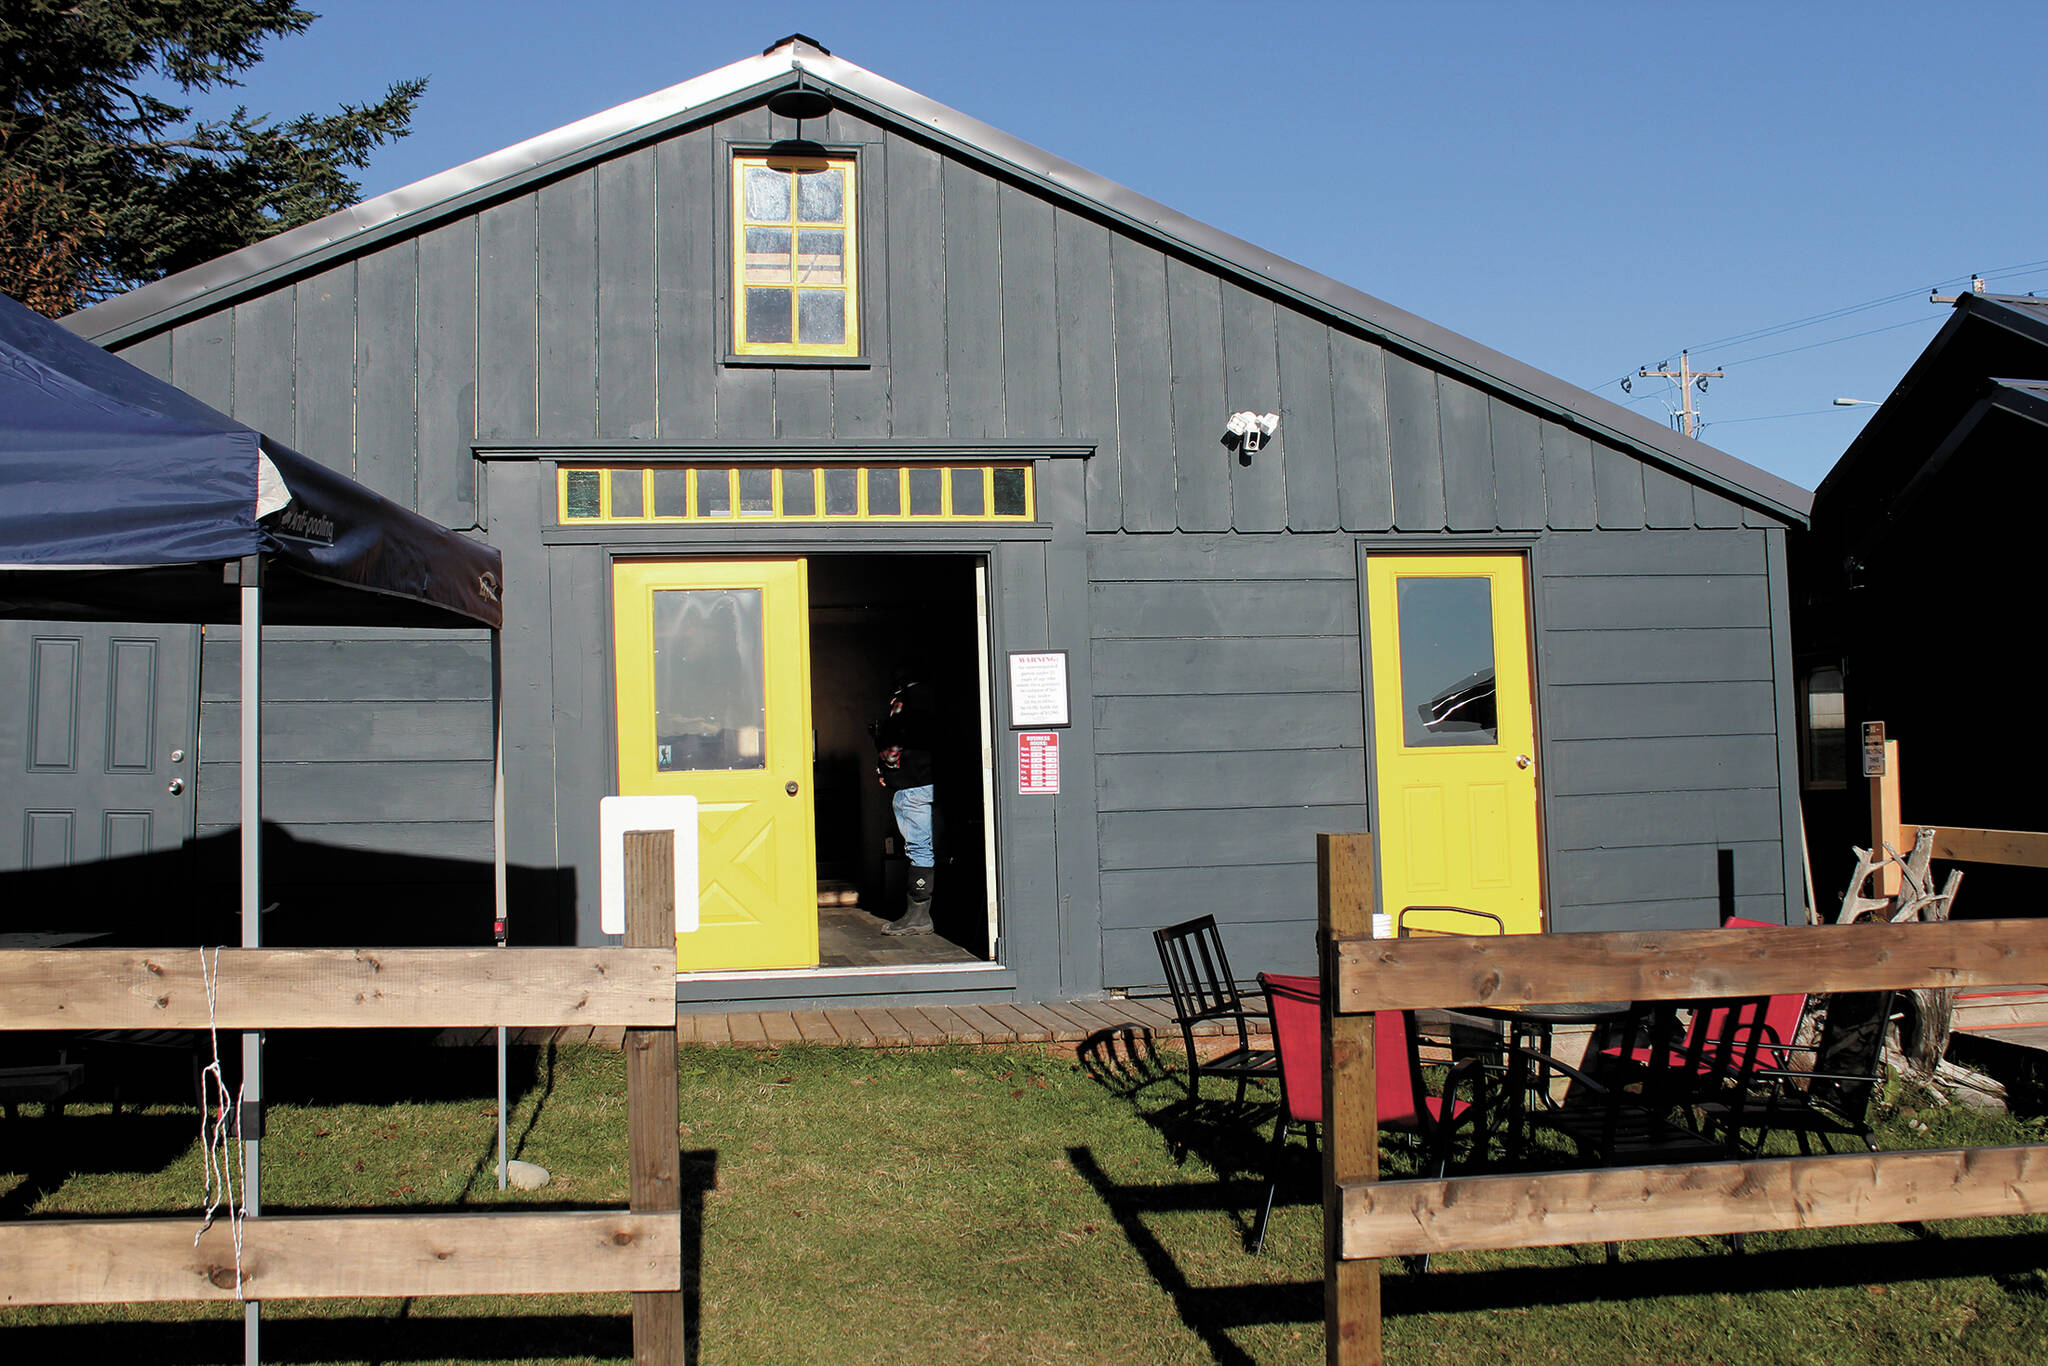 Sweetgale Meadworks and Cider House, seen here Oct. 20, 2020 on Main Street in Homer, Alaska, is now open for business serving berry meads and ciders using local fruits. (Photo by Megan Pacer/Homer News)